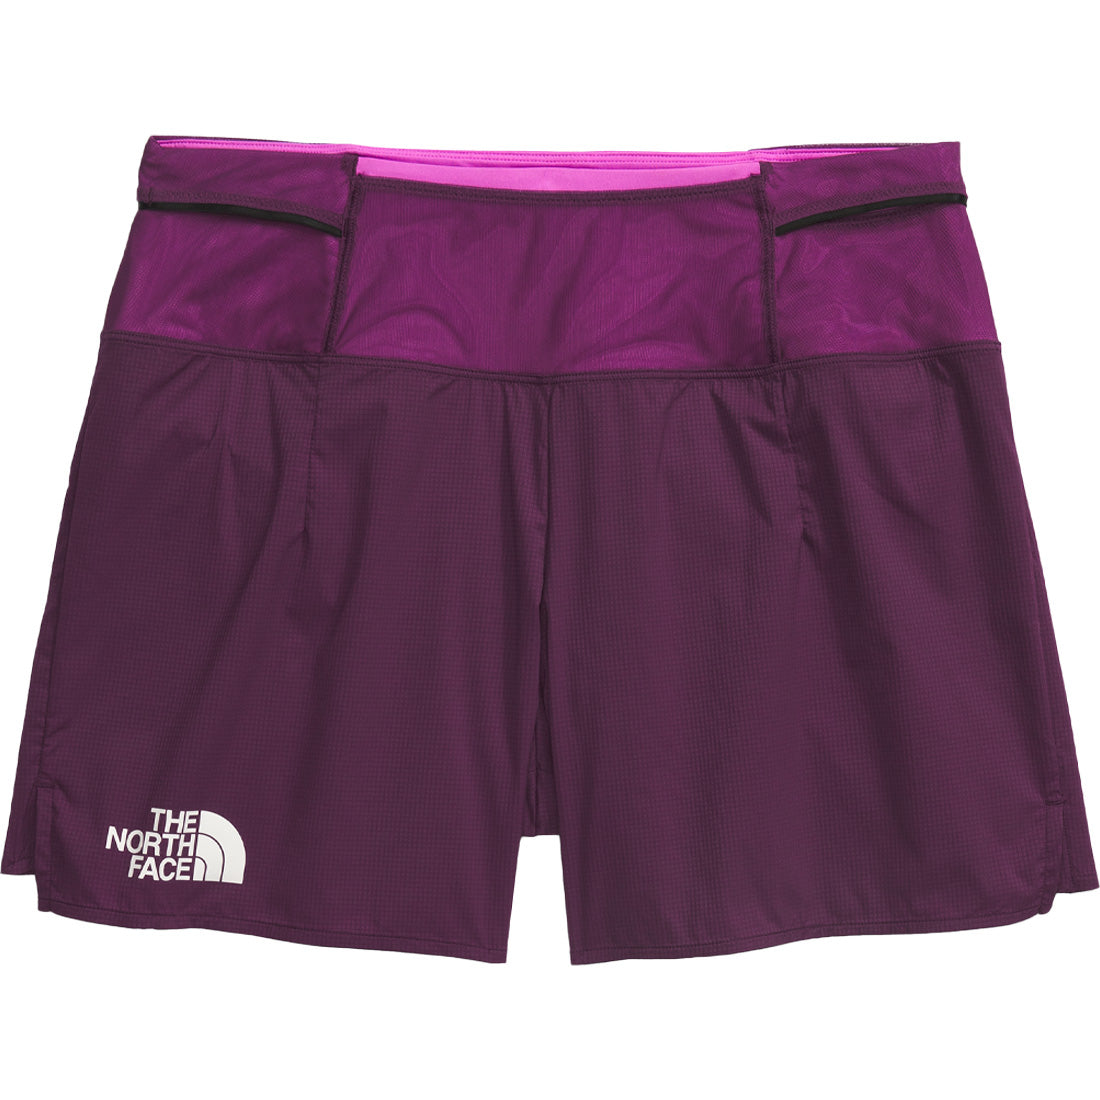 The North Face Summit Series Pacesetter Short 5" - Women's